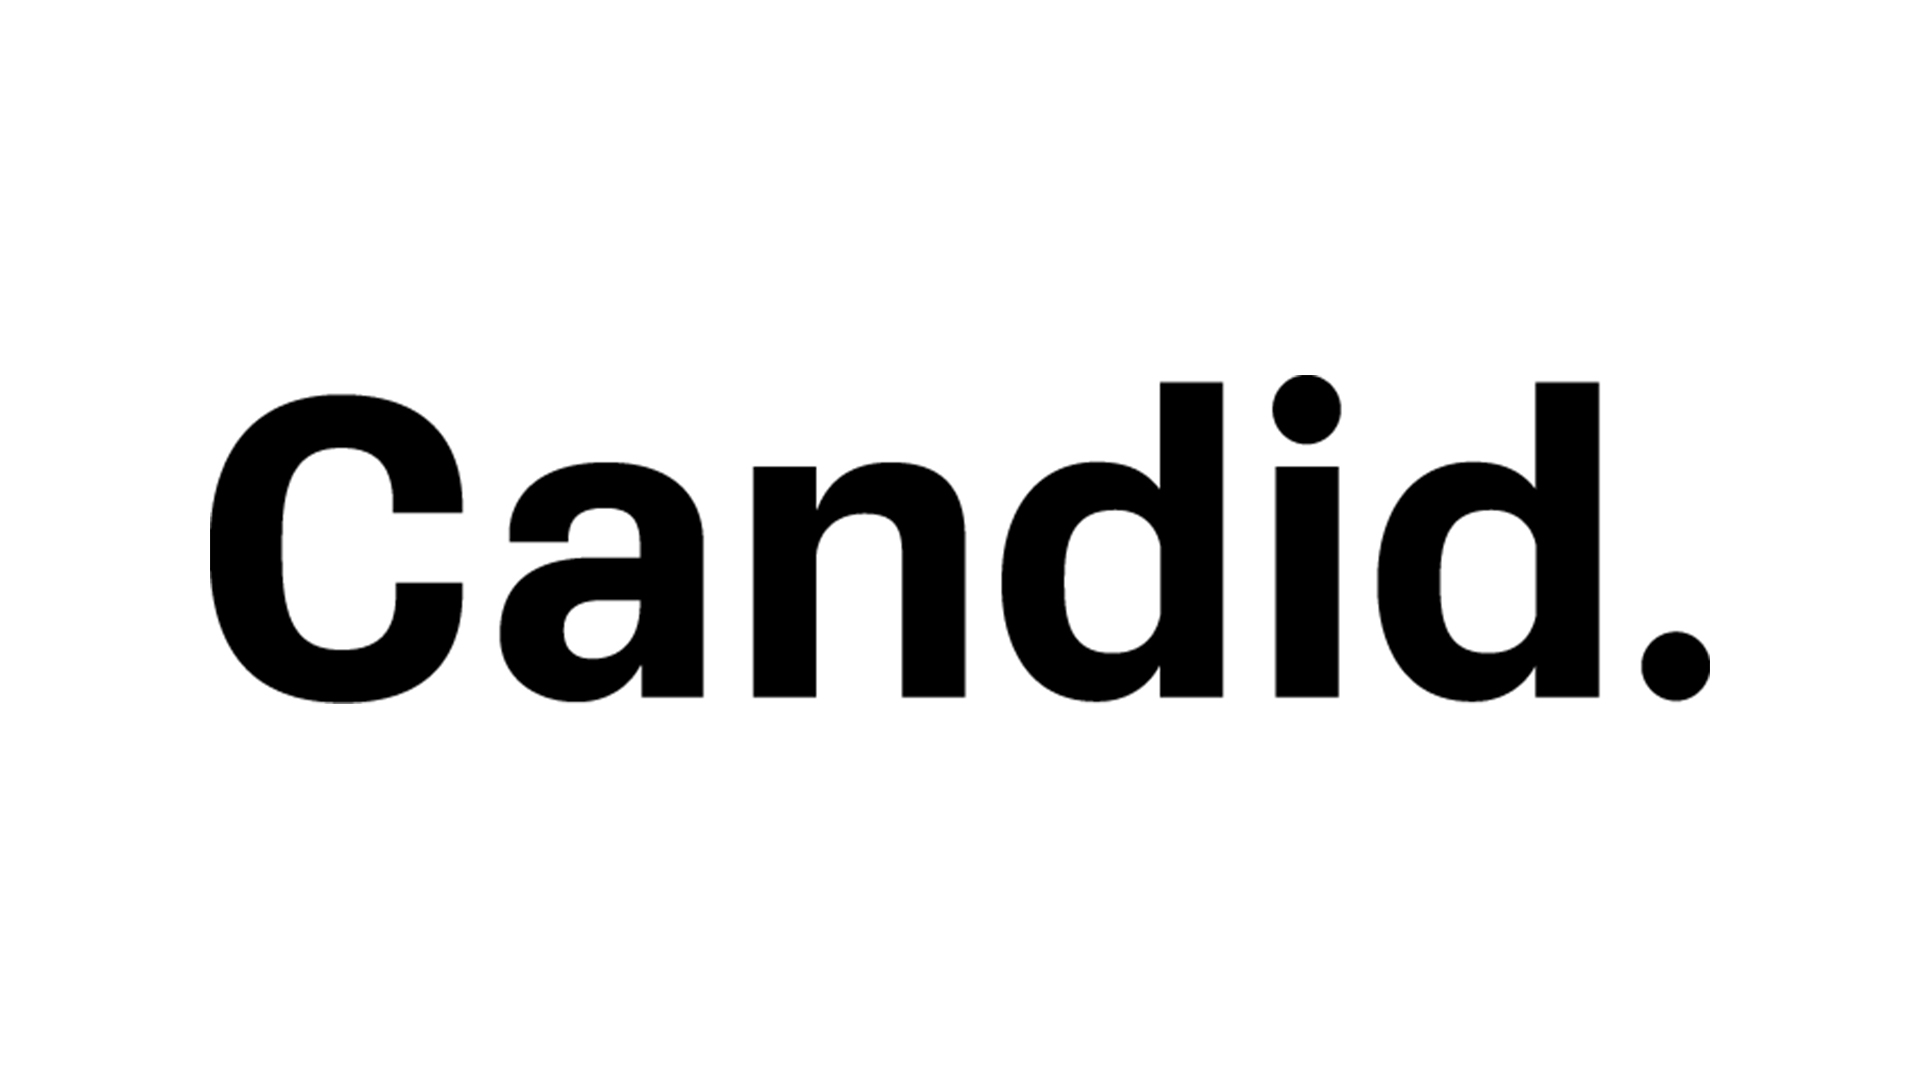 The Candid logo reads, "Candid." in black.